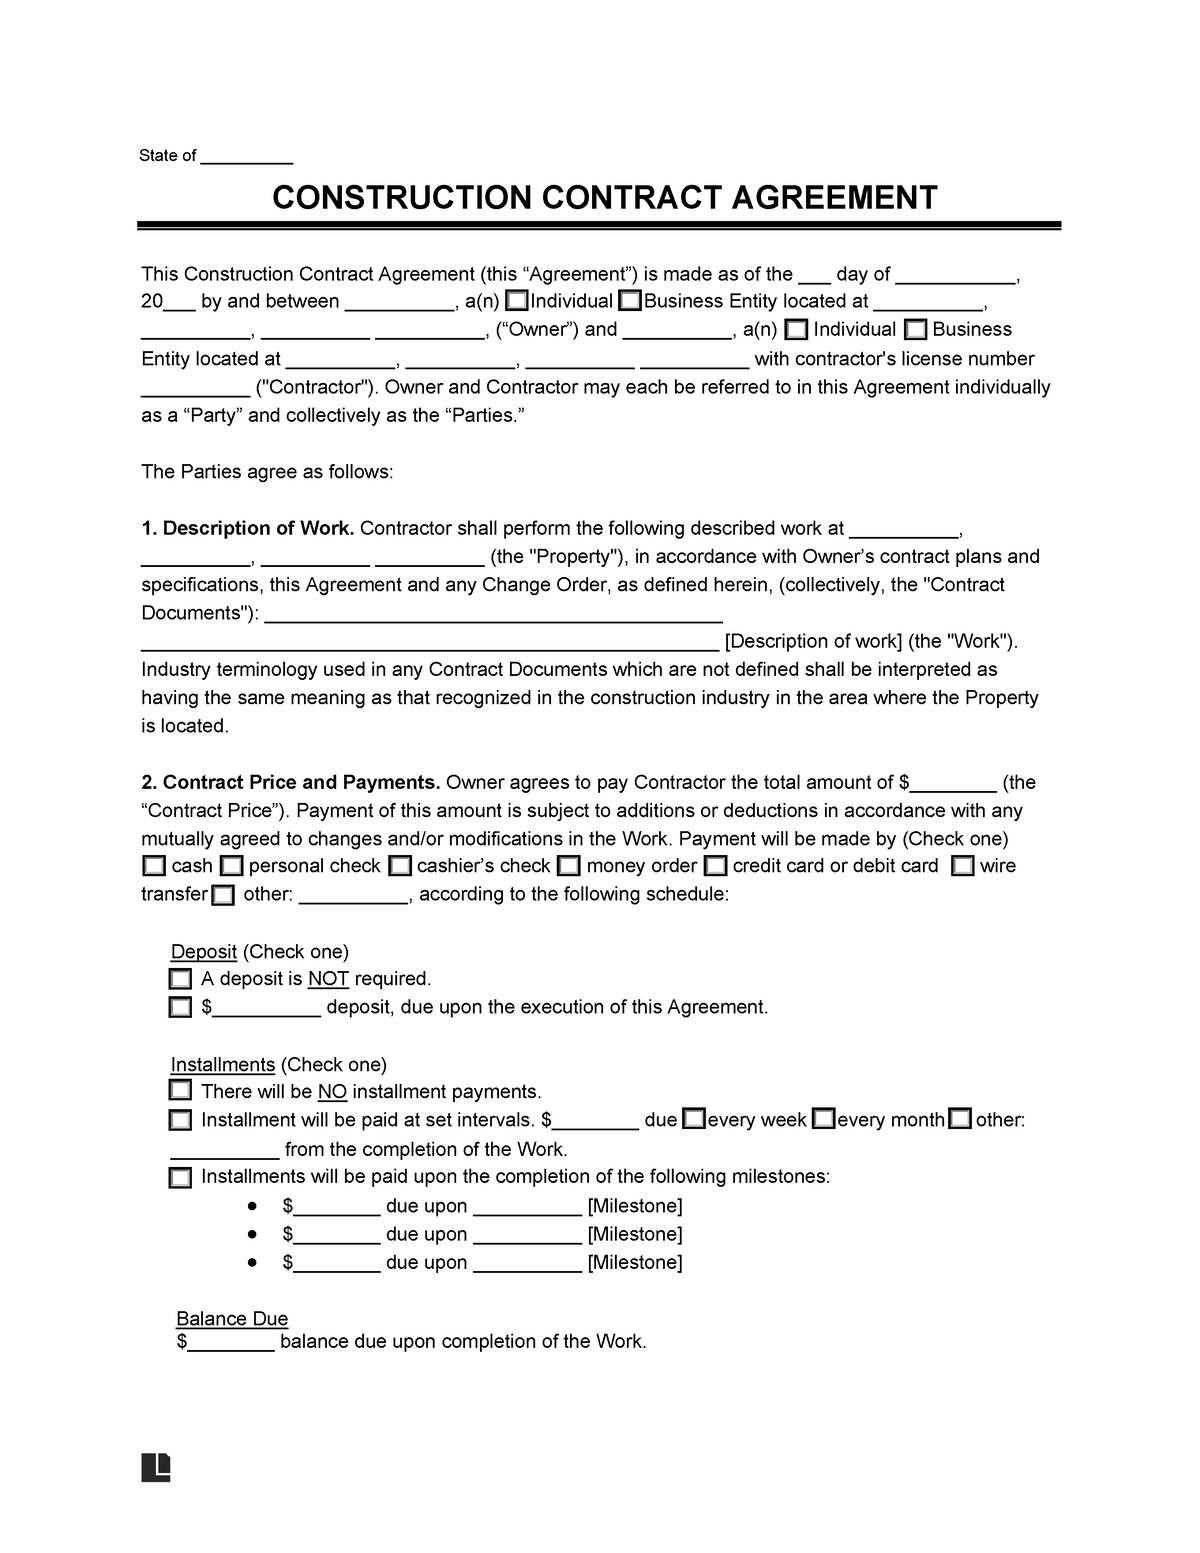 construction-contract-template-state-of-construction